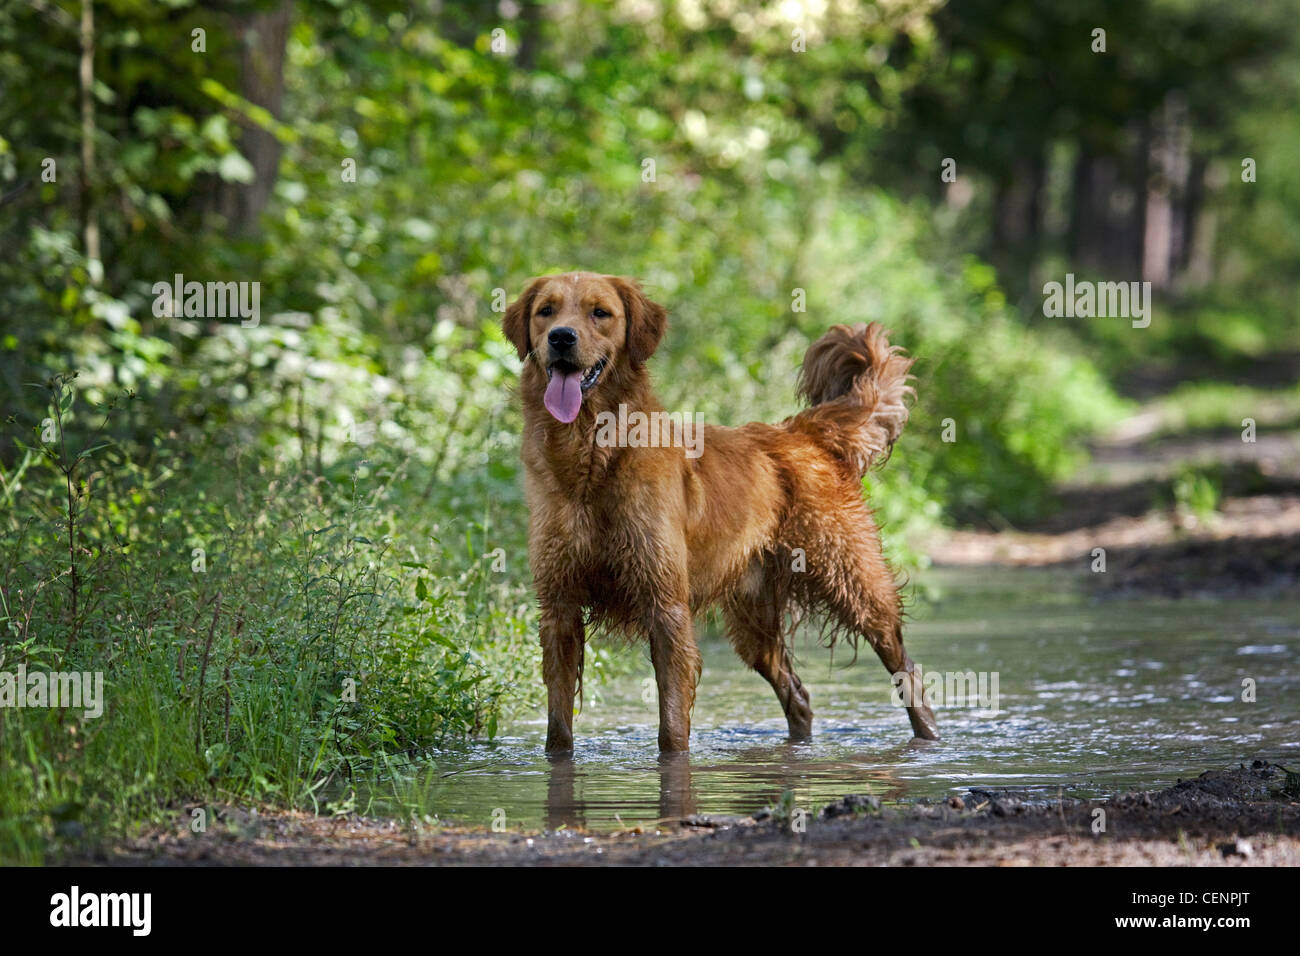 Golden retriever dog with wet fur standing in muddy puddle on forest track, Belgium Stock Photo